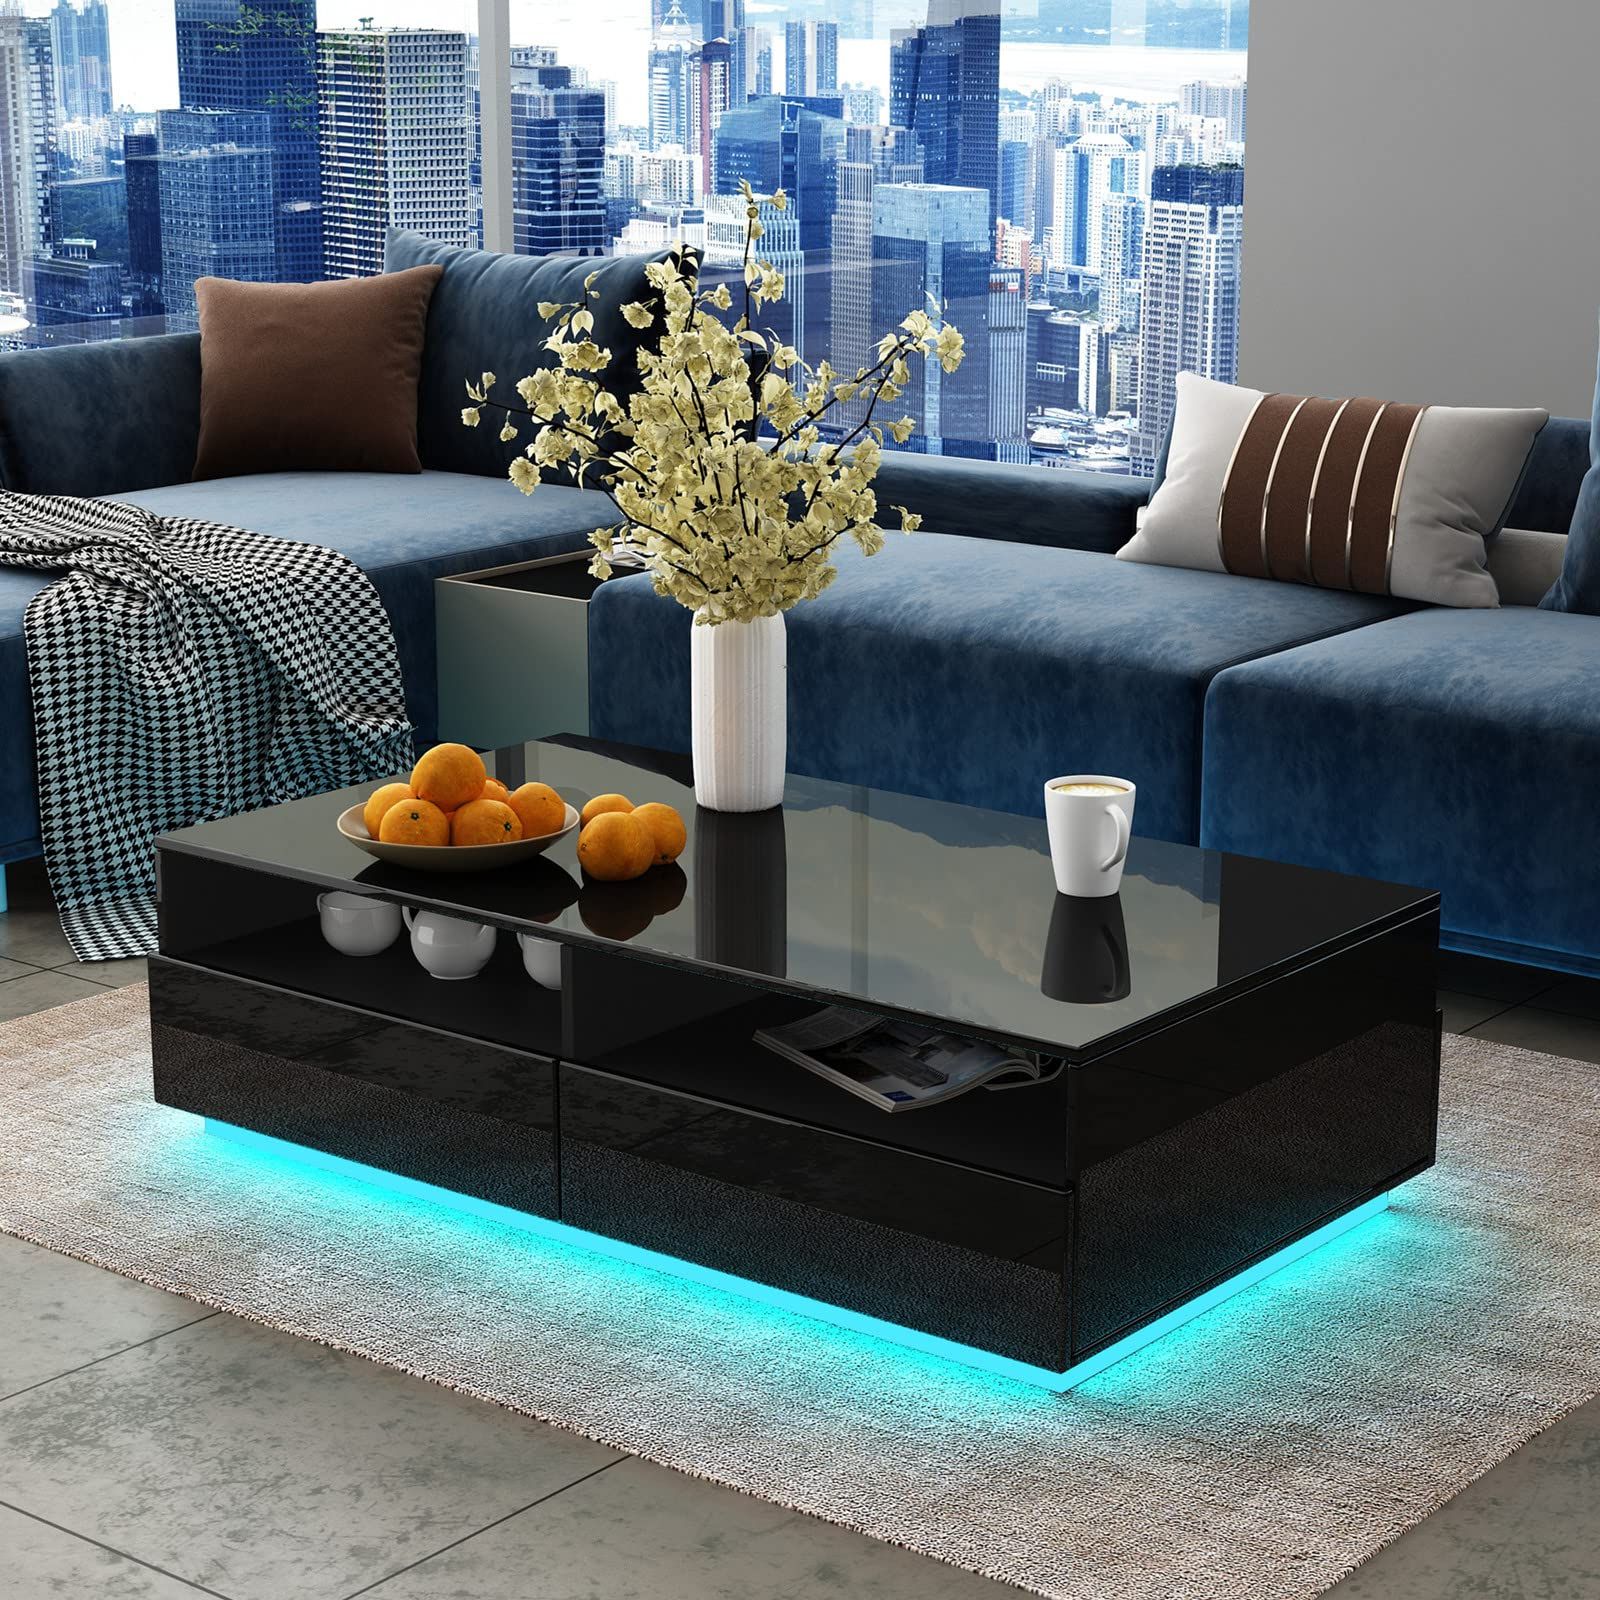 Preferred Coffee Tables With Led Lights Throughout Awoood Coffee Table For Living Room,led Side Table Modern Wooden Centre  Table,black Gloss Coffee Tables With 4 Drawer Storage For Home :  Amazon.co (View 7 of 10)